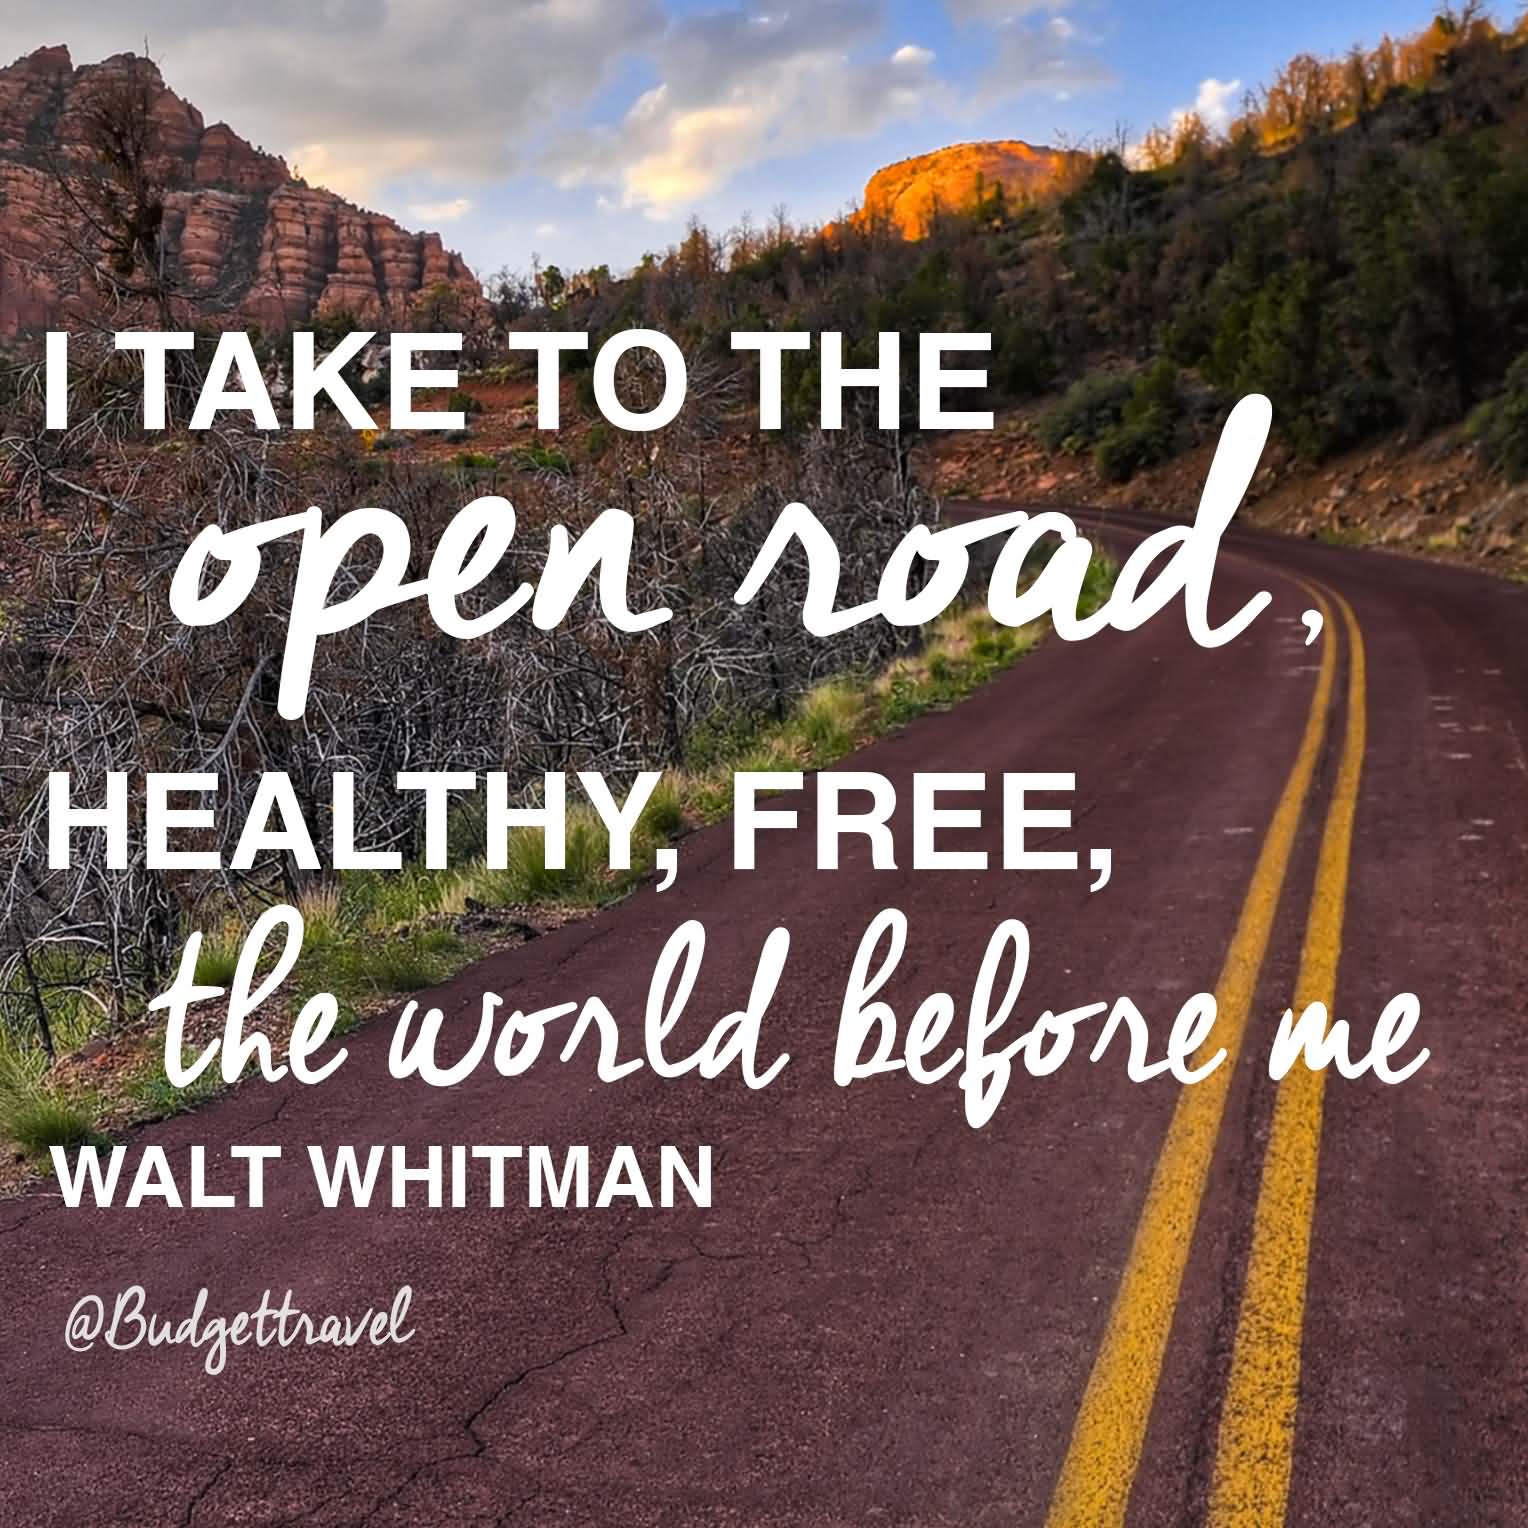 I take to the open road, Healthy, free, the world before me. - Walt Whitman